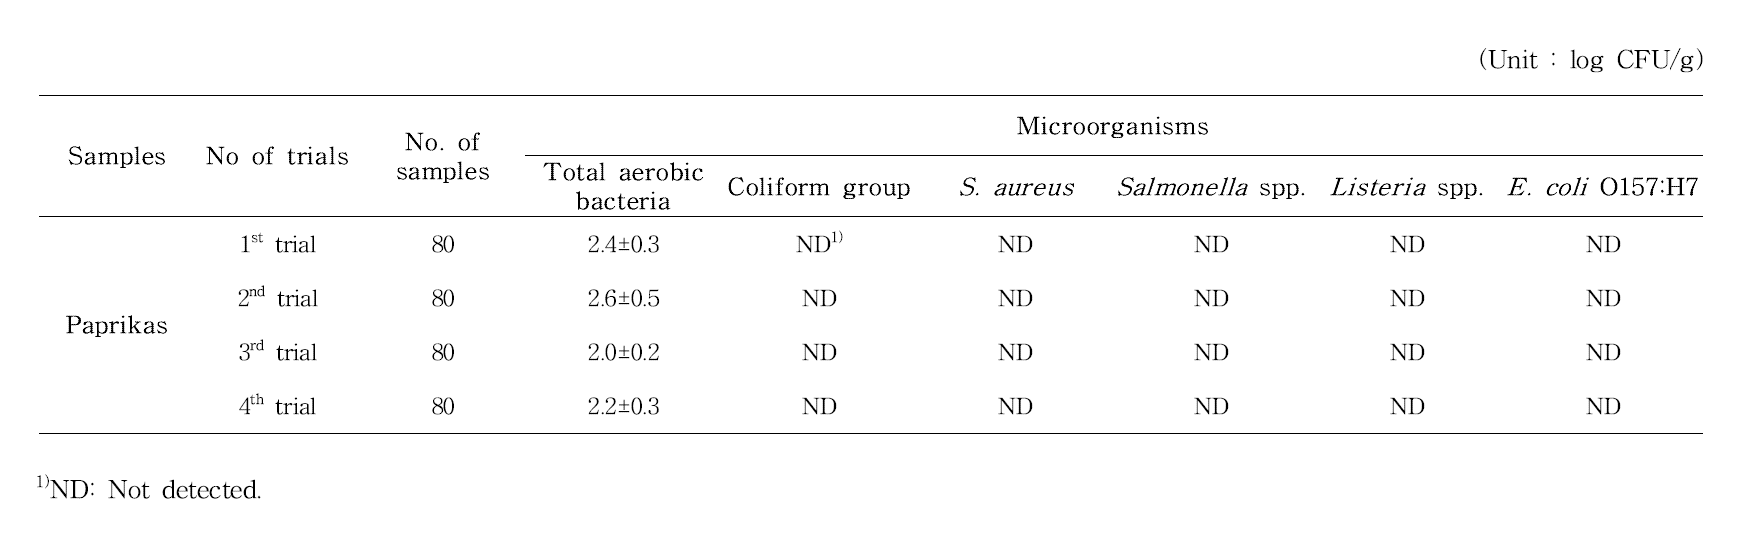 Counts of total aerobic bacteria, coliform group and pathogens from paprikas